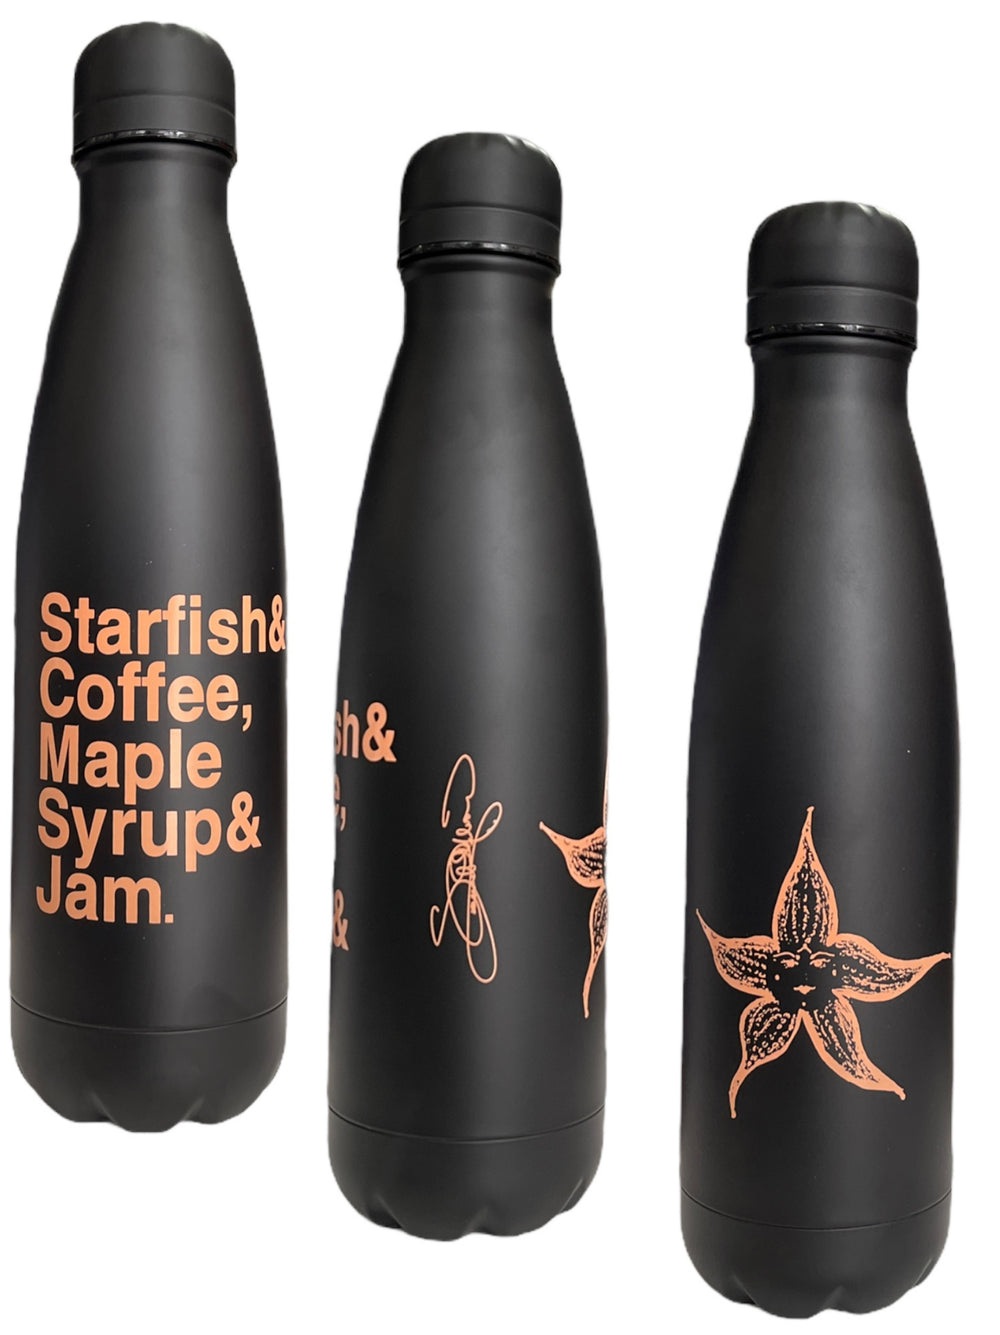 Prince – Starfish & Coffee Official Drinks Bottle Signature Edition Peach & Black Prince